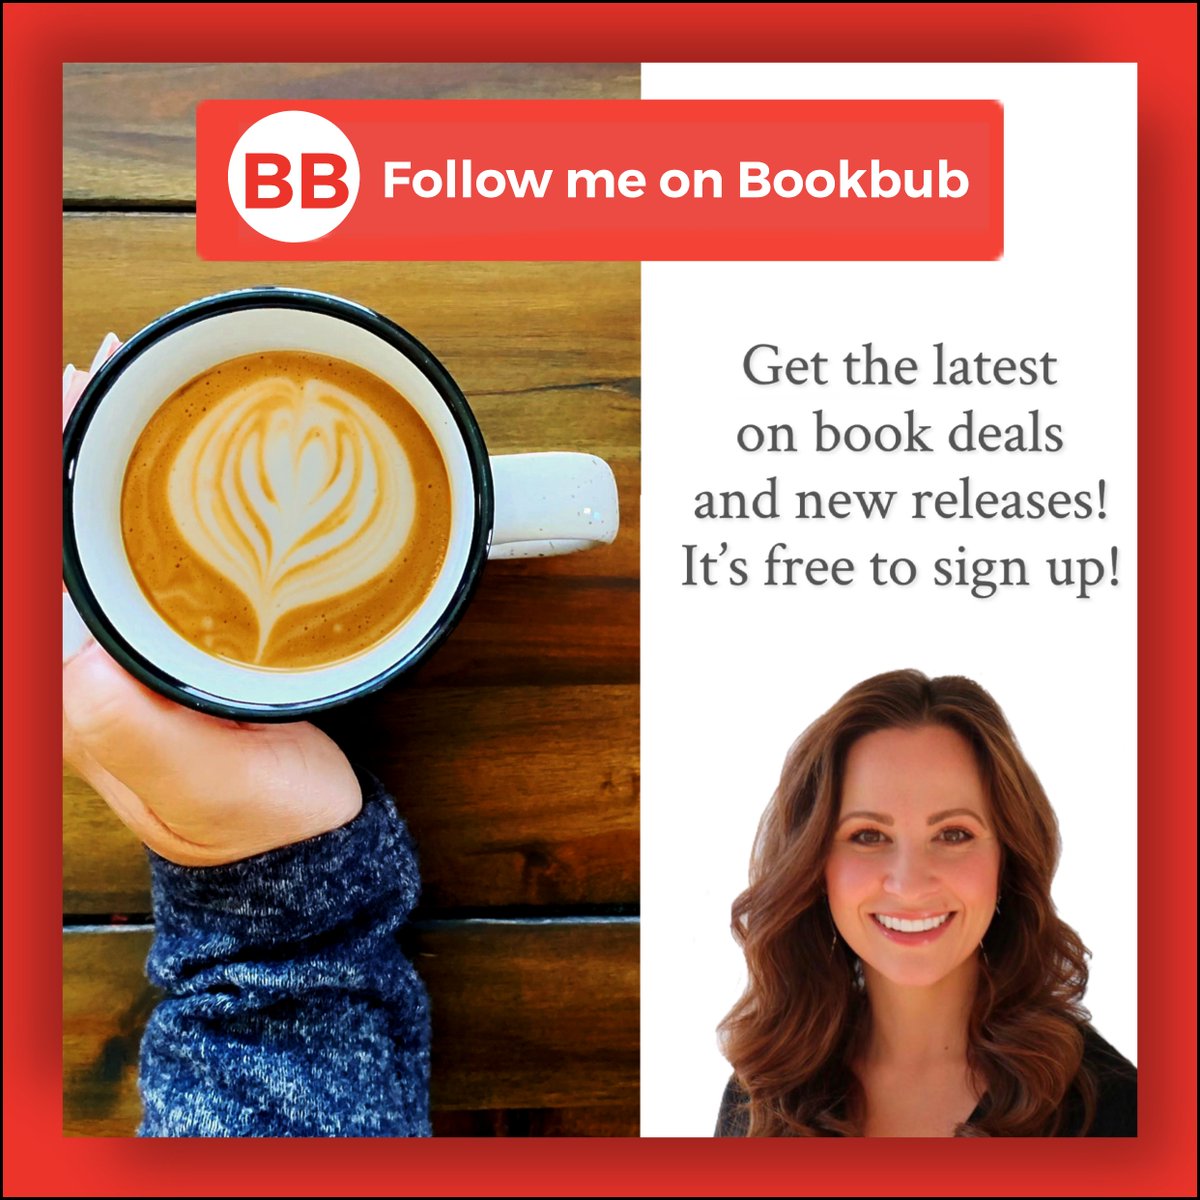 RT @HarpethRoad: Guess what! @jhaleauthor is on @BookBub! You can follow her here: https://t.co/NP6nACrpYj https://t.co/zntWsdpFVs